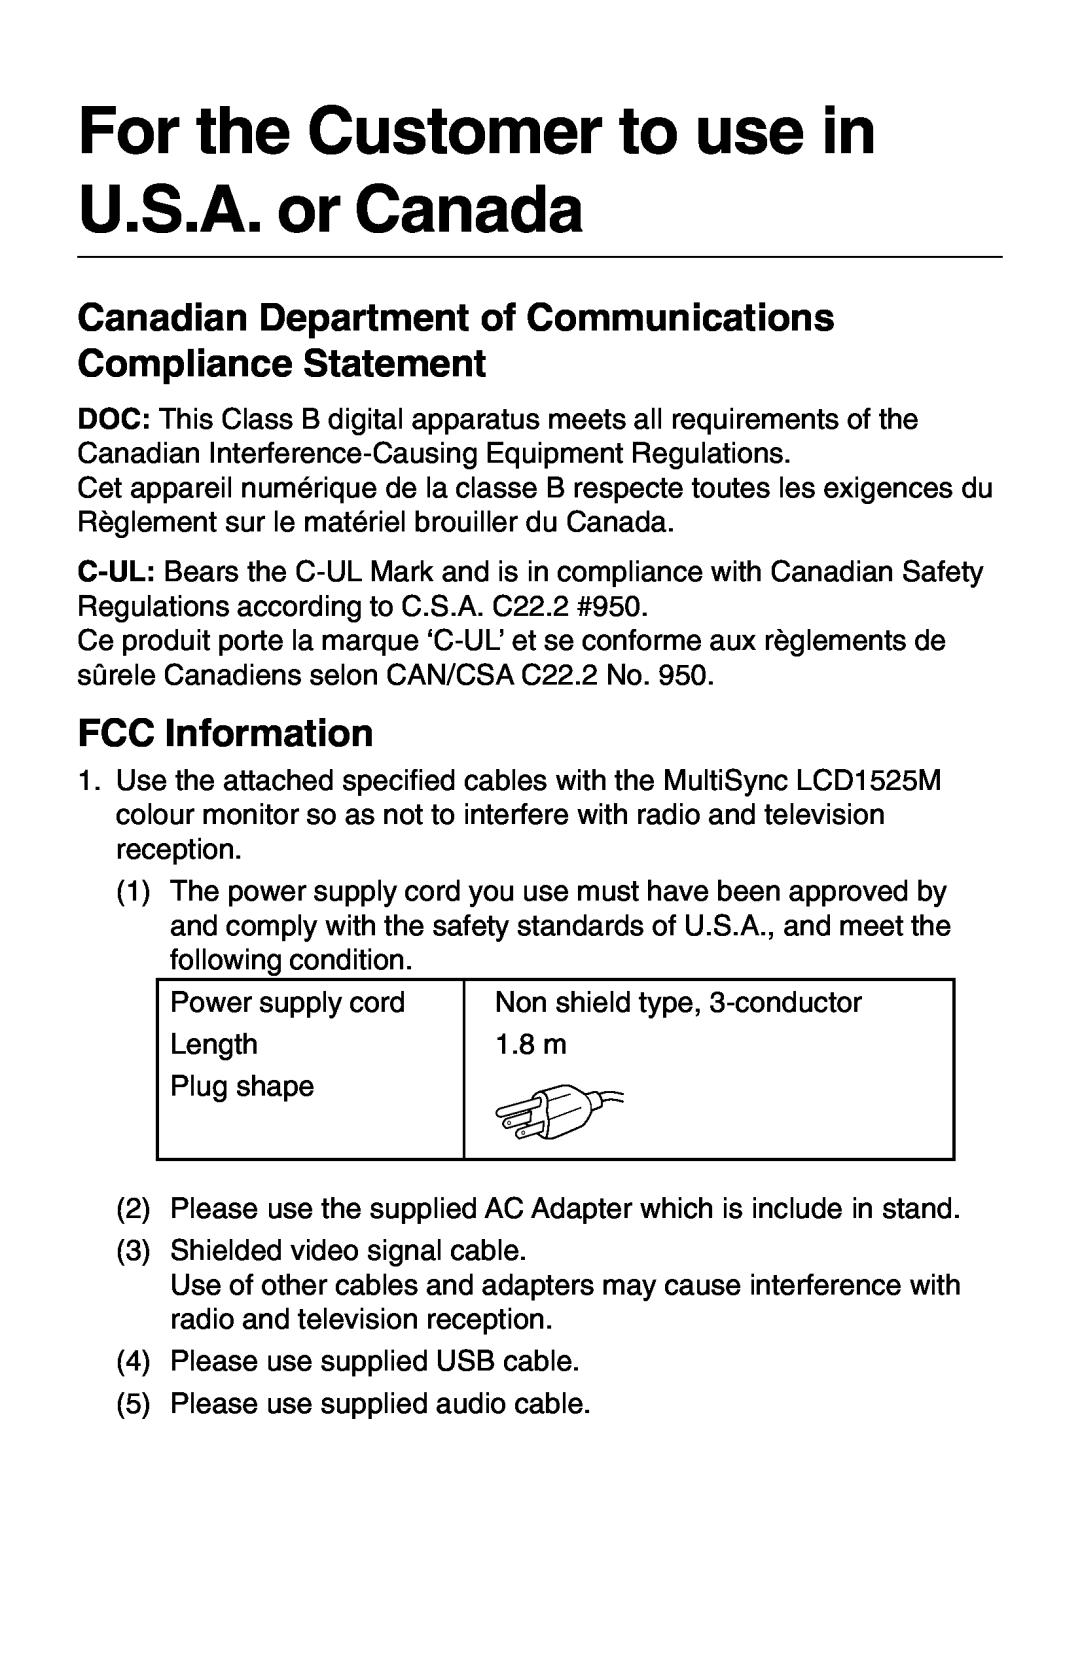 NEC 1525M manual For the Customer to use in U.S.A. or Canada, Canadian Department of Communications Compliance Statement 